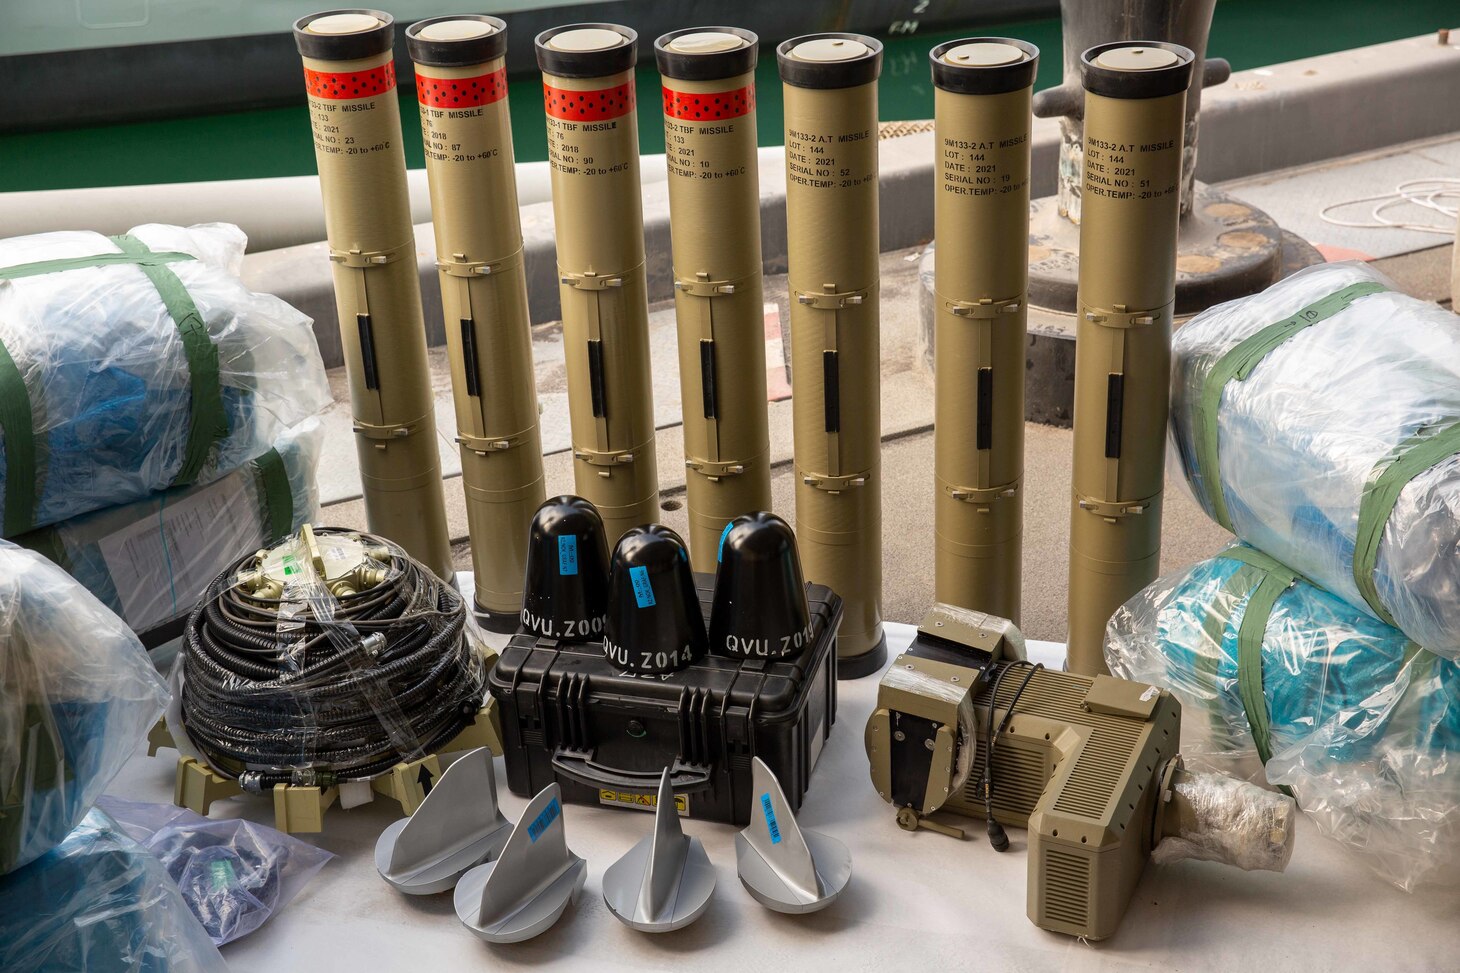 U.S. 5TH FLEET AREA OF OPERATIONS (Feb. 26, 2023) Anti-tank guided missiles and medium-range ballistic missile components seized by the United Kingdom Royal Navy sit pierside during inventory at a military facility in the U.S. 5th Fleet area of operations, Feb. 26, 2023.